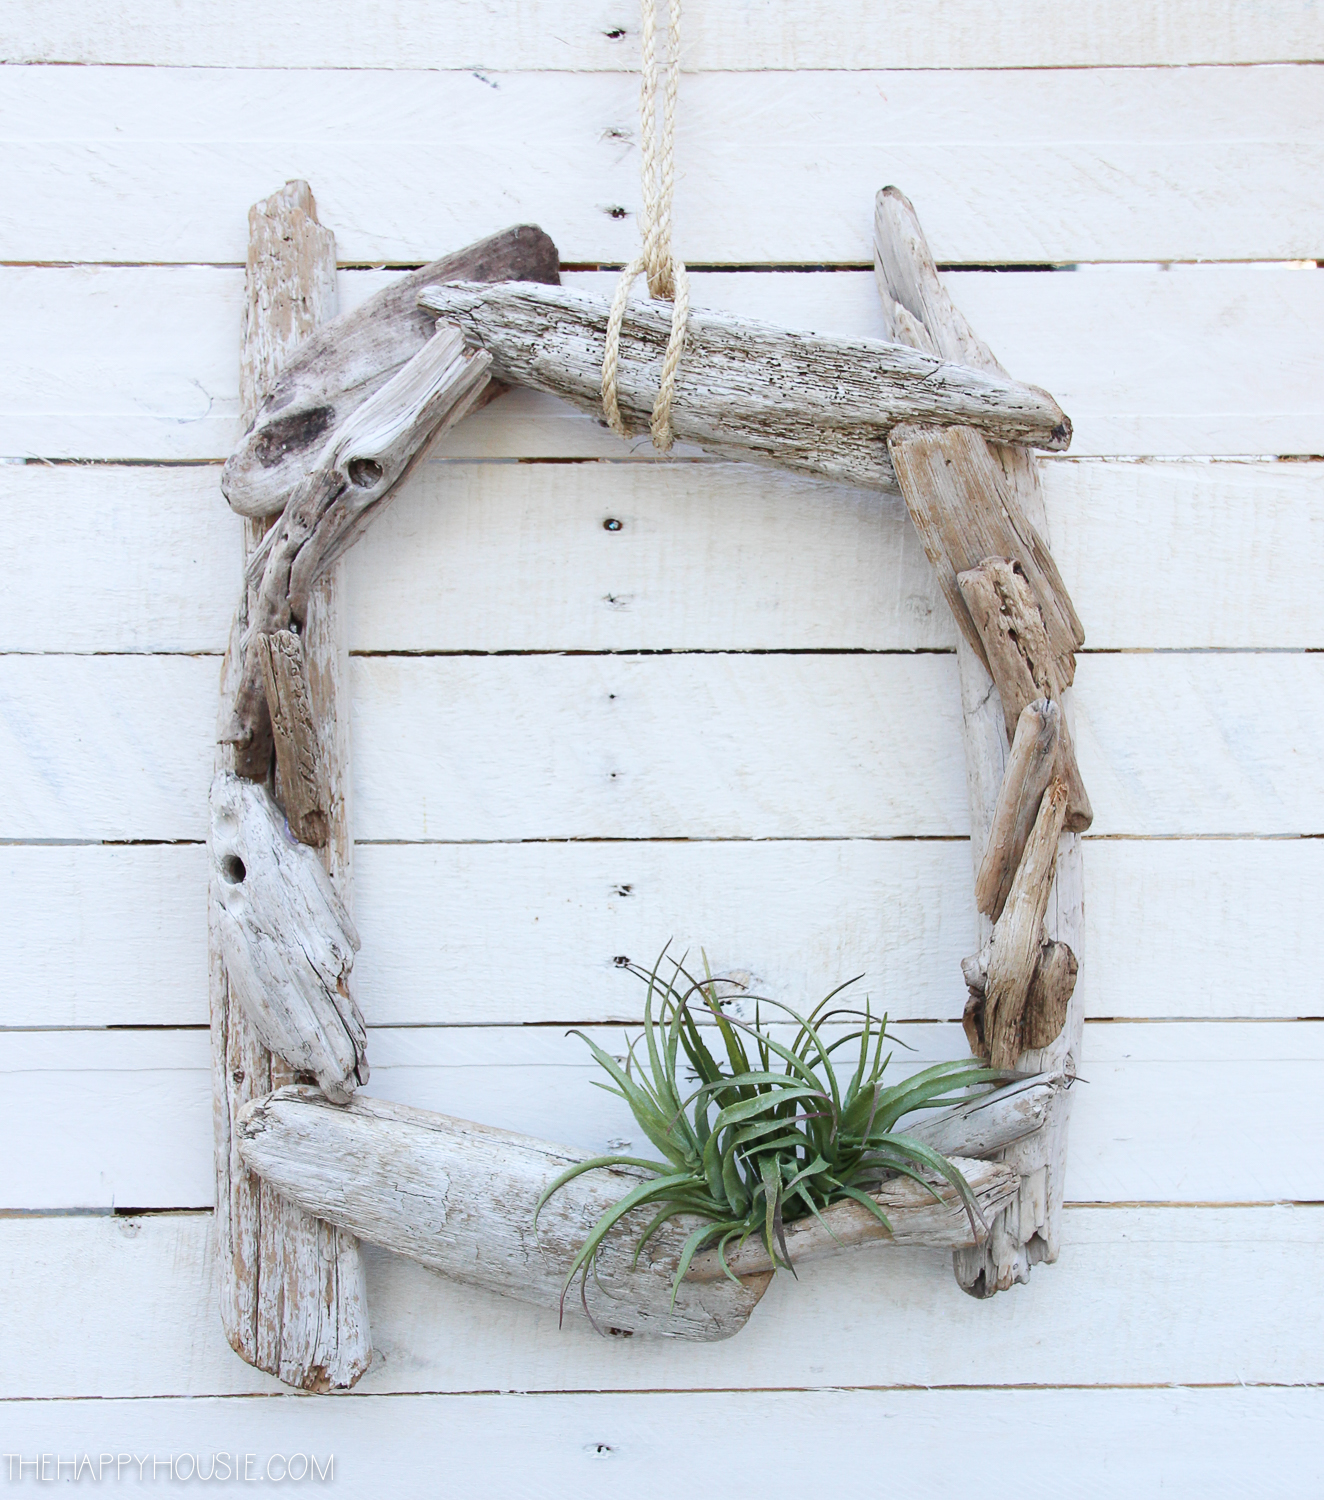 The driftwood wreath hanging up with a small plant in it.